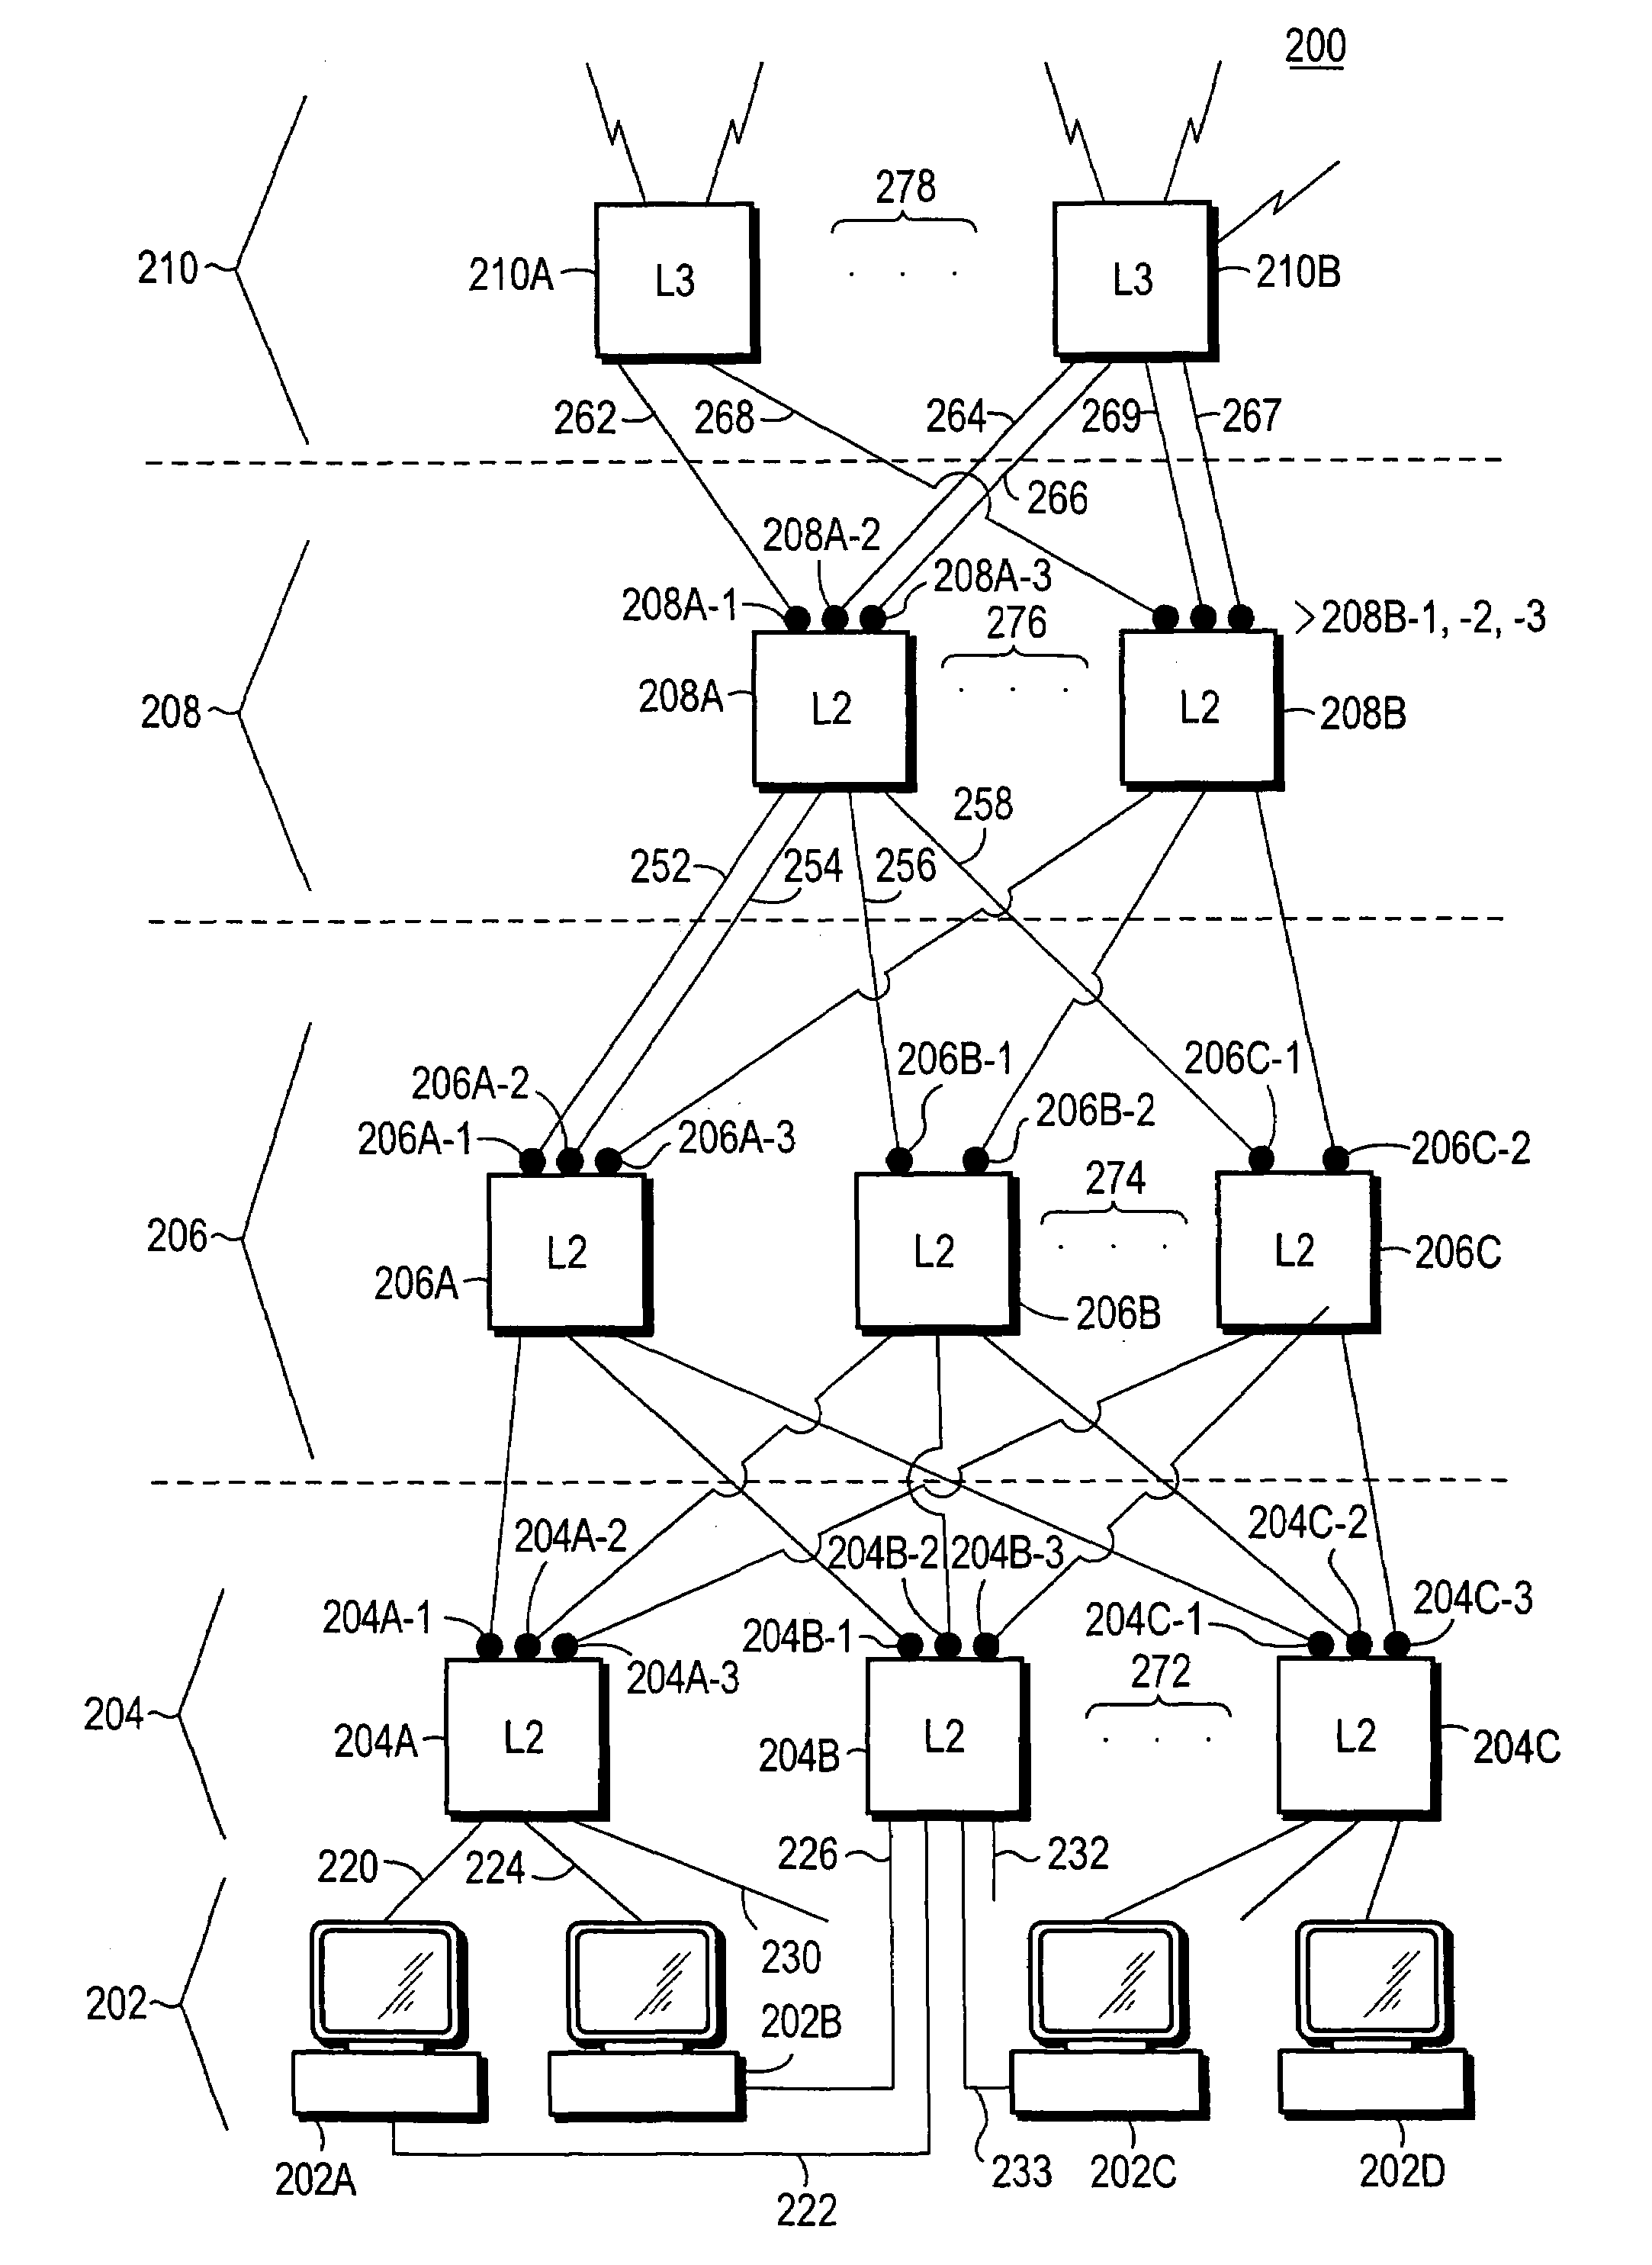 Apparatus and method for preventing loops in a computer network